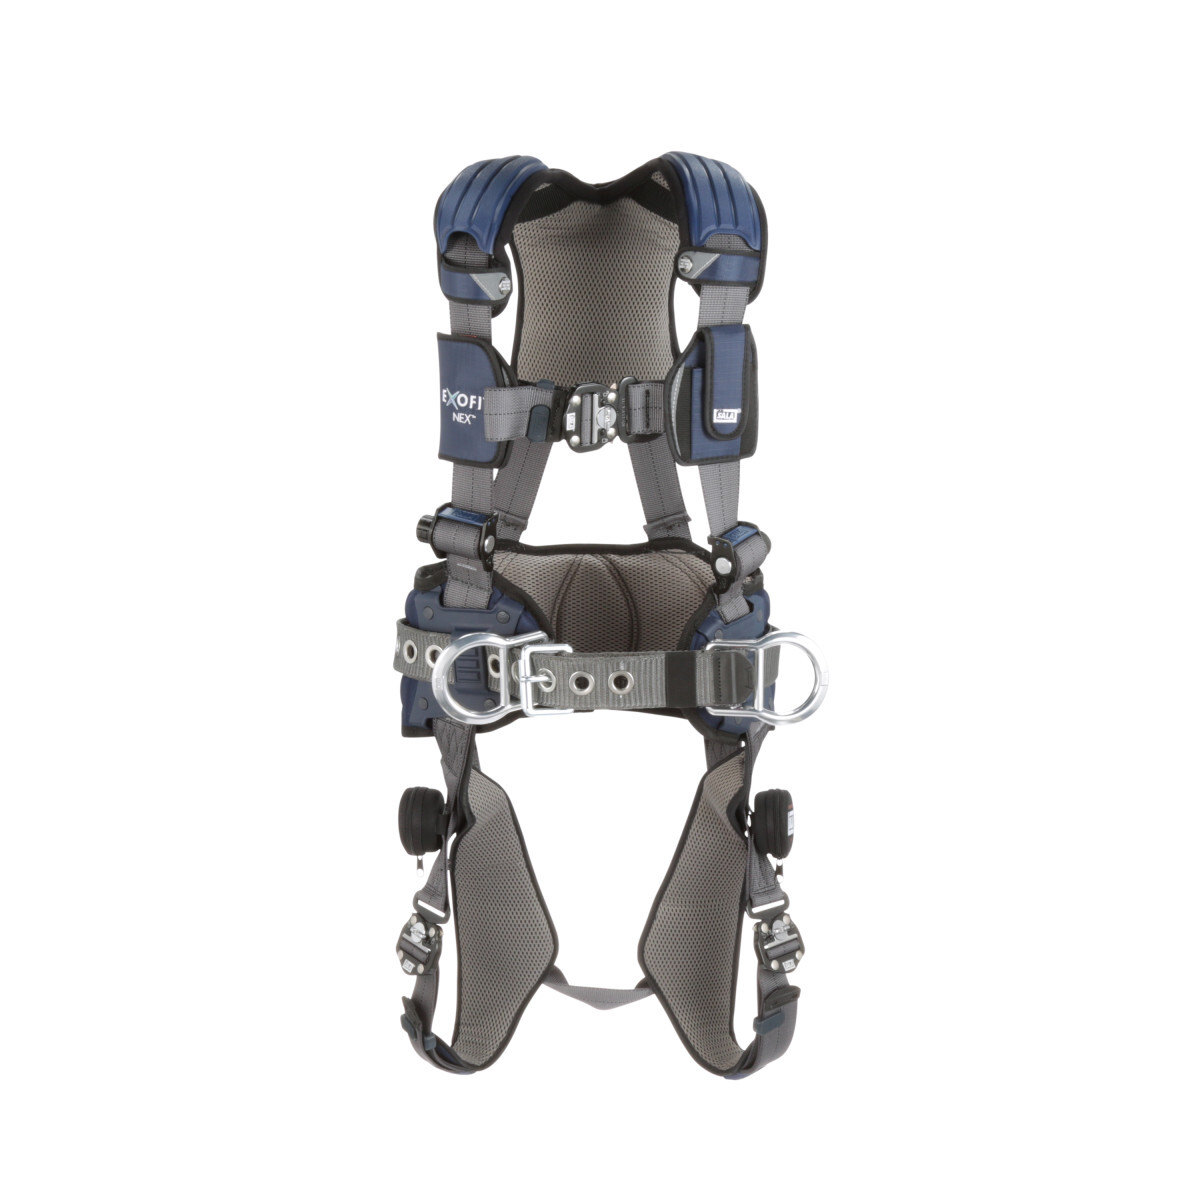 3M™ DBI-SALA® 2X ExoFit NEX™ Construction/Full Body Style Harness With Tech-Lite™ Aluminum Back D-Ring, Duo-Lok™ Quick Connect L